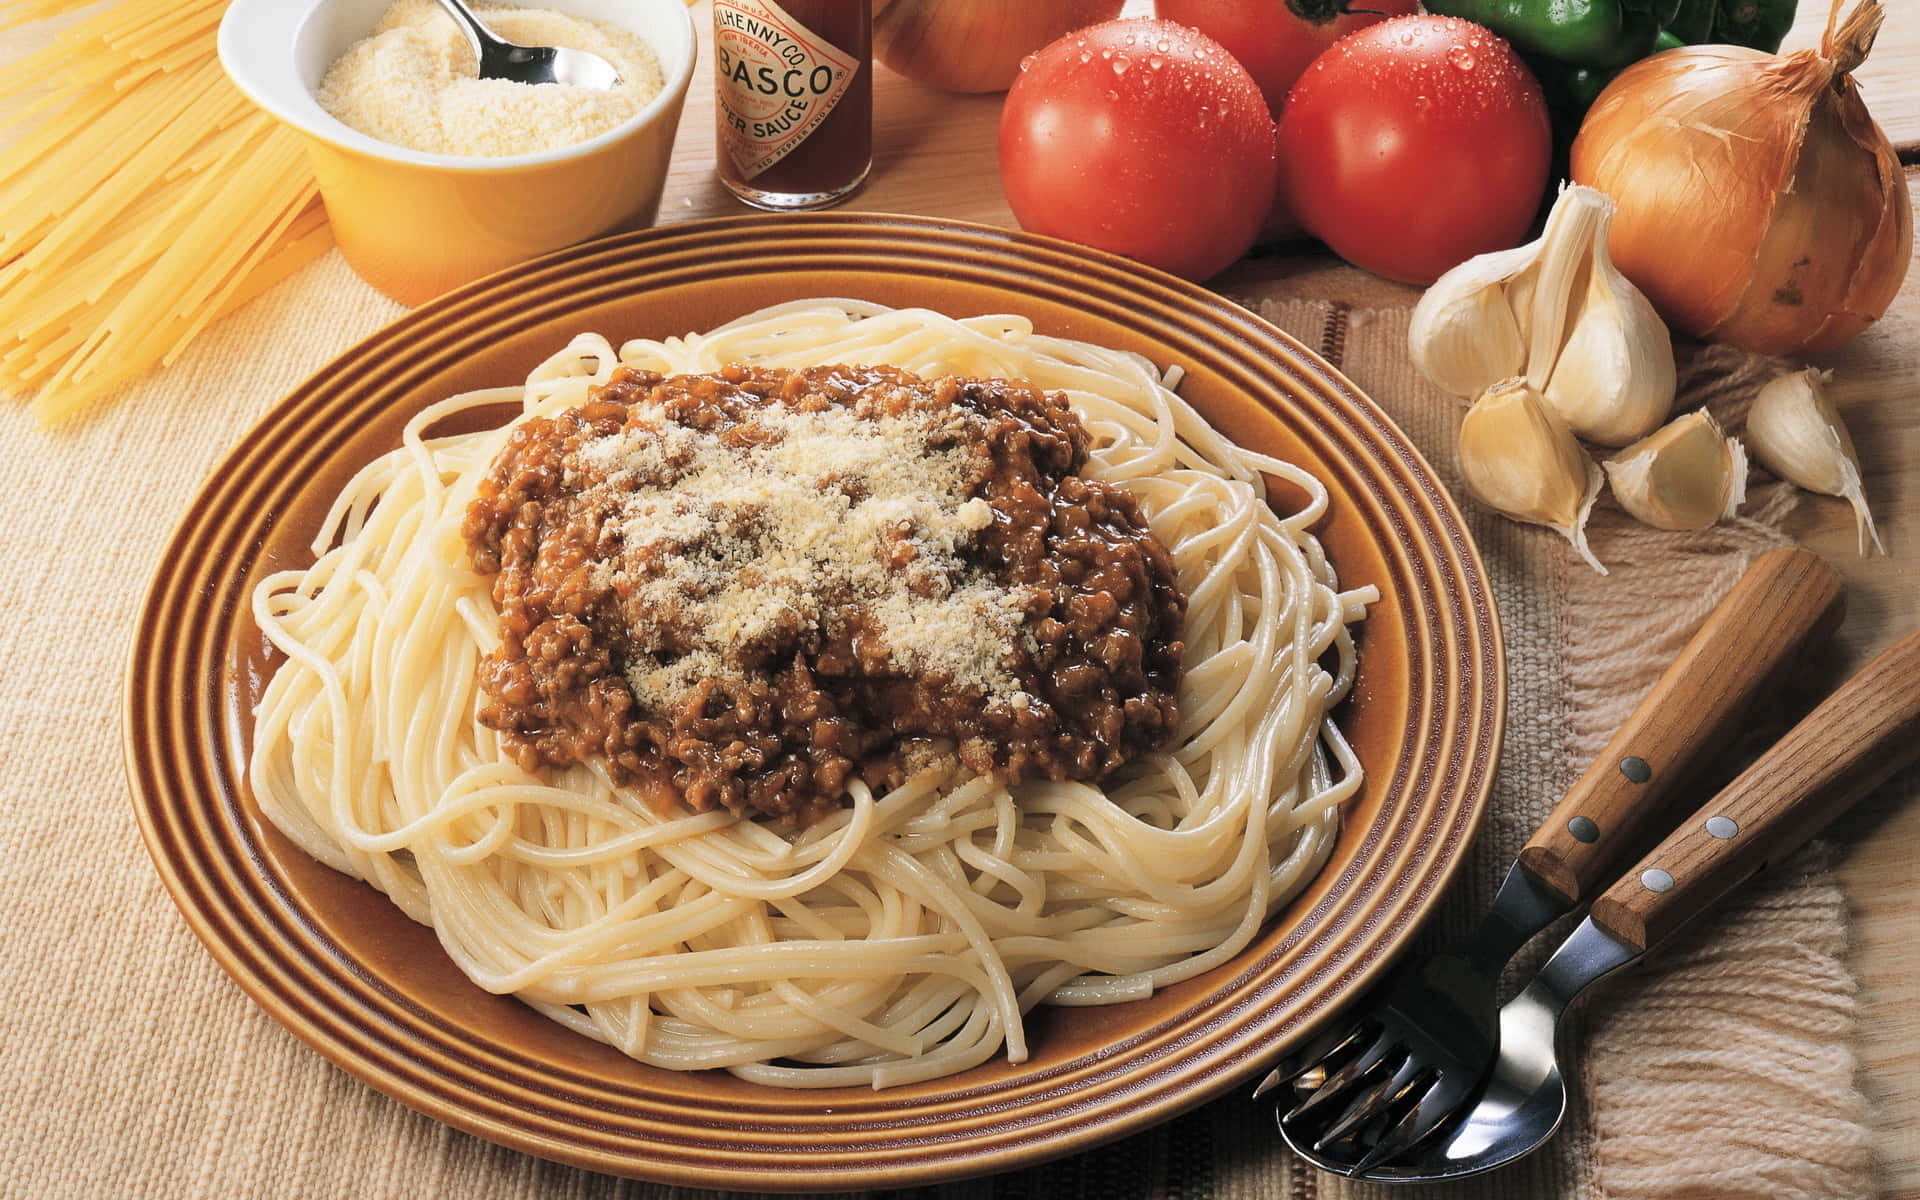 A Plate Of Spaghetti With Meat Sauce